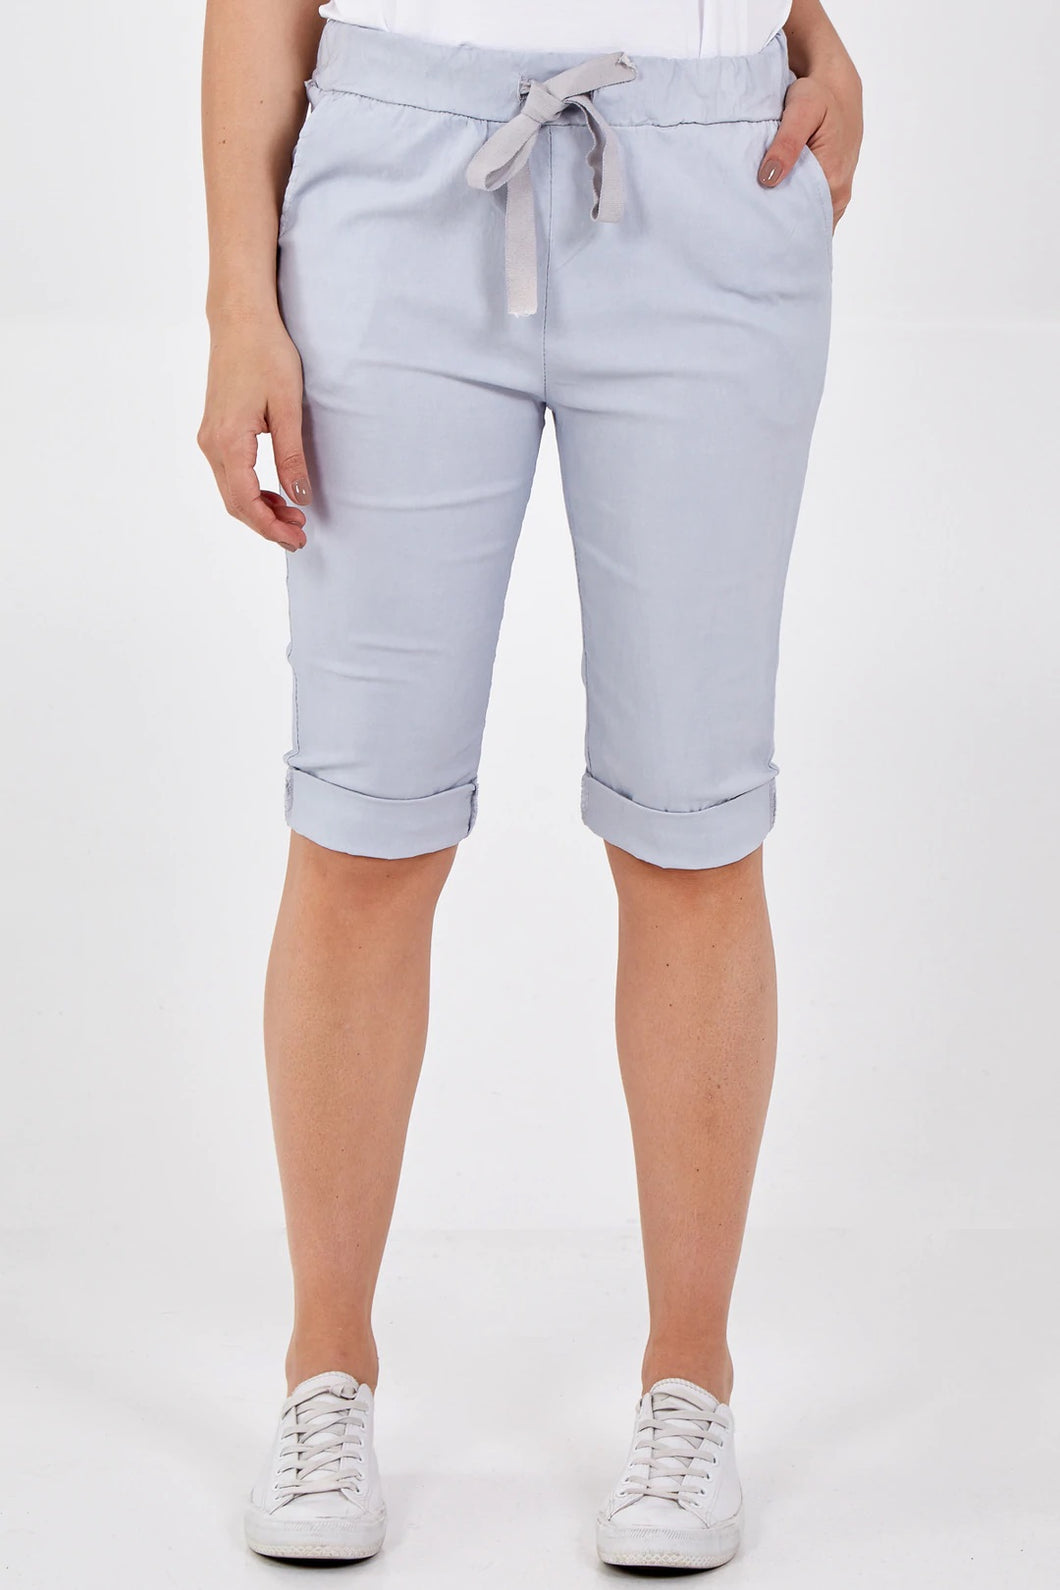 Ashley Magic Cropped Plain Capri Trousers (6 Colours) – Missy Online:  Shoes, Fashion & Accessories Based in Leeds